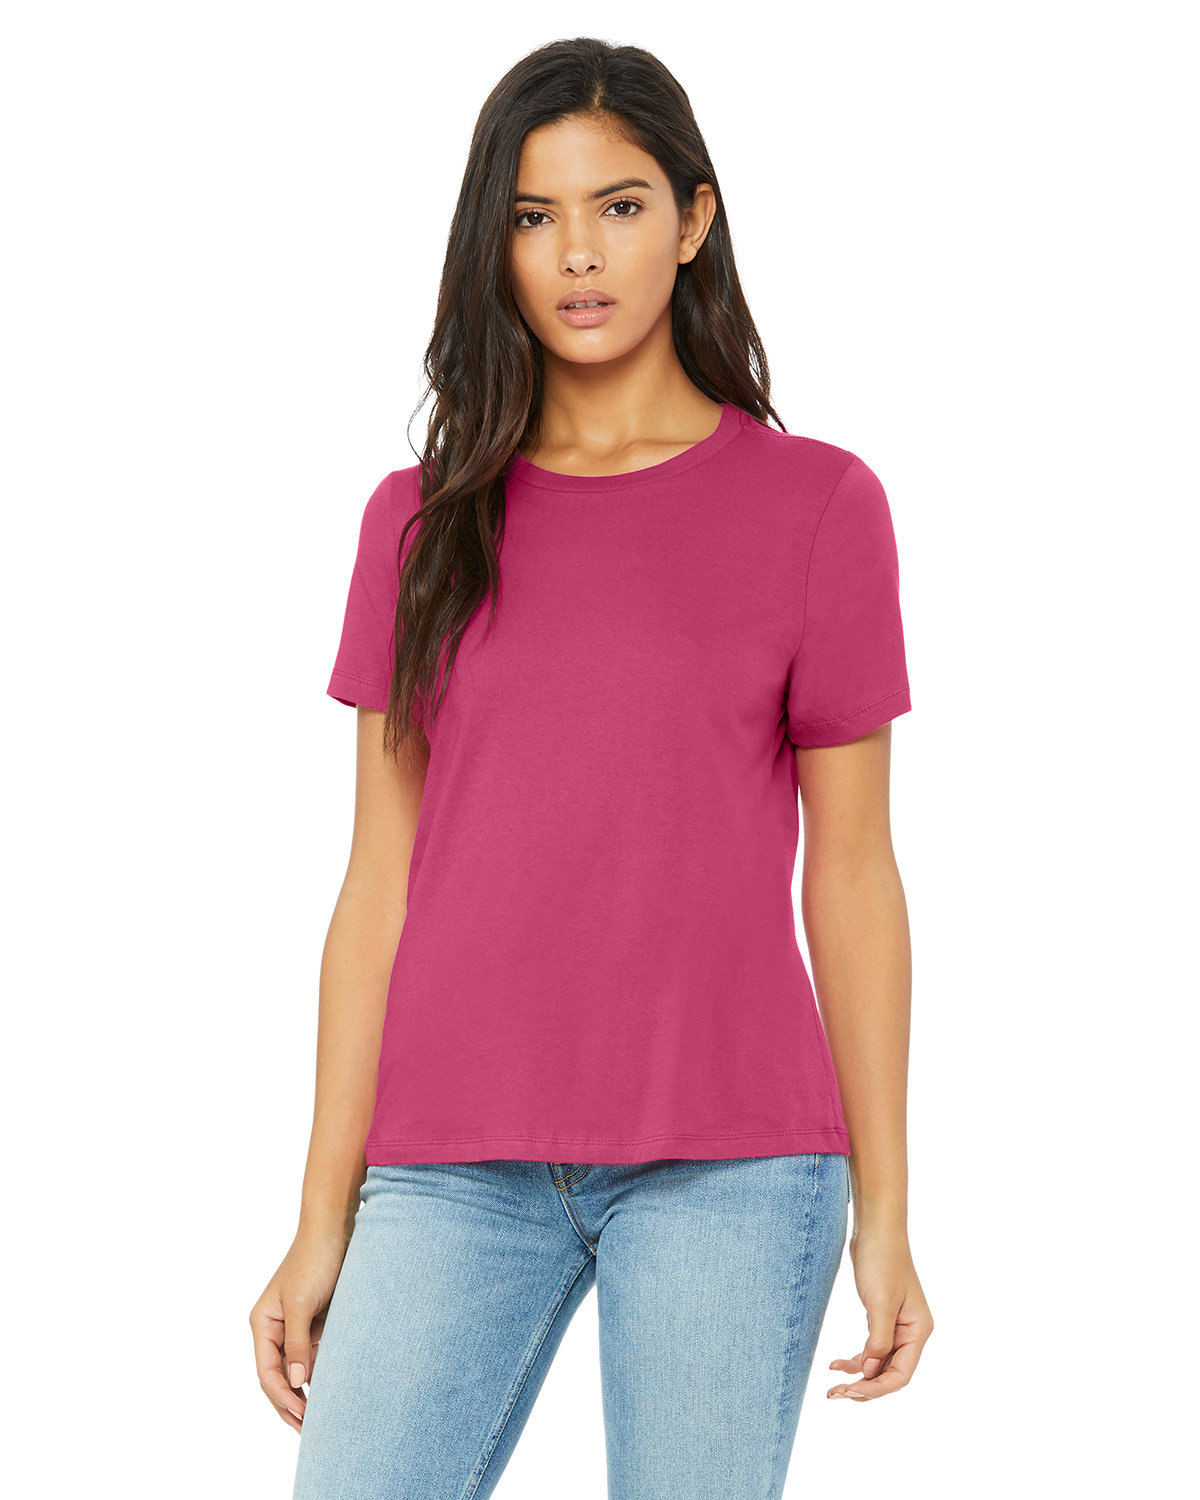 Bella + Canvas Ladies' Relaxed Jersey Short-Sleeve T-Shirt BERRY 